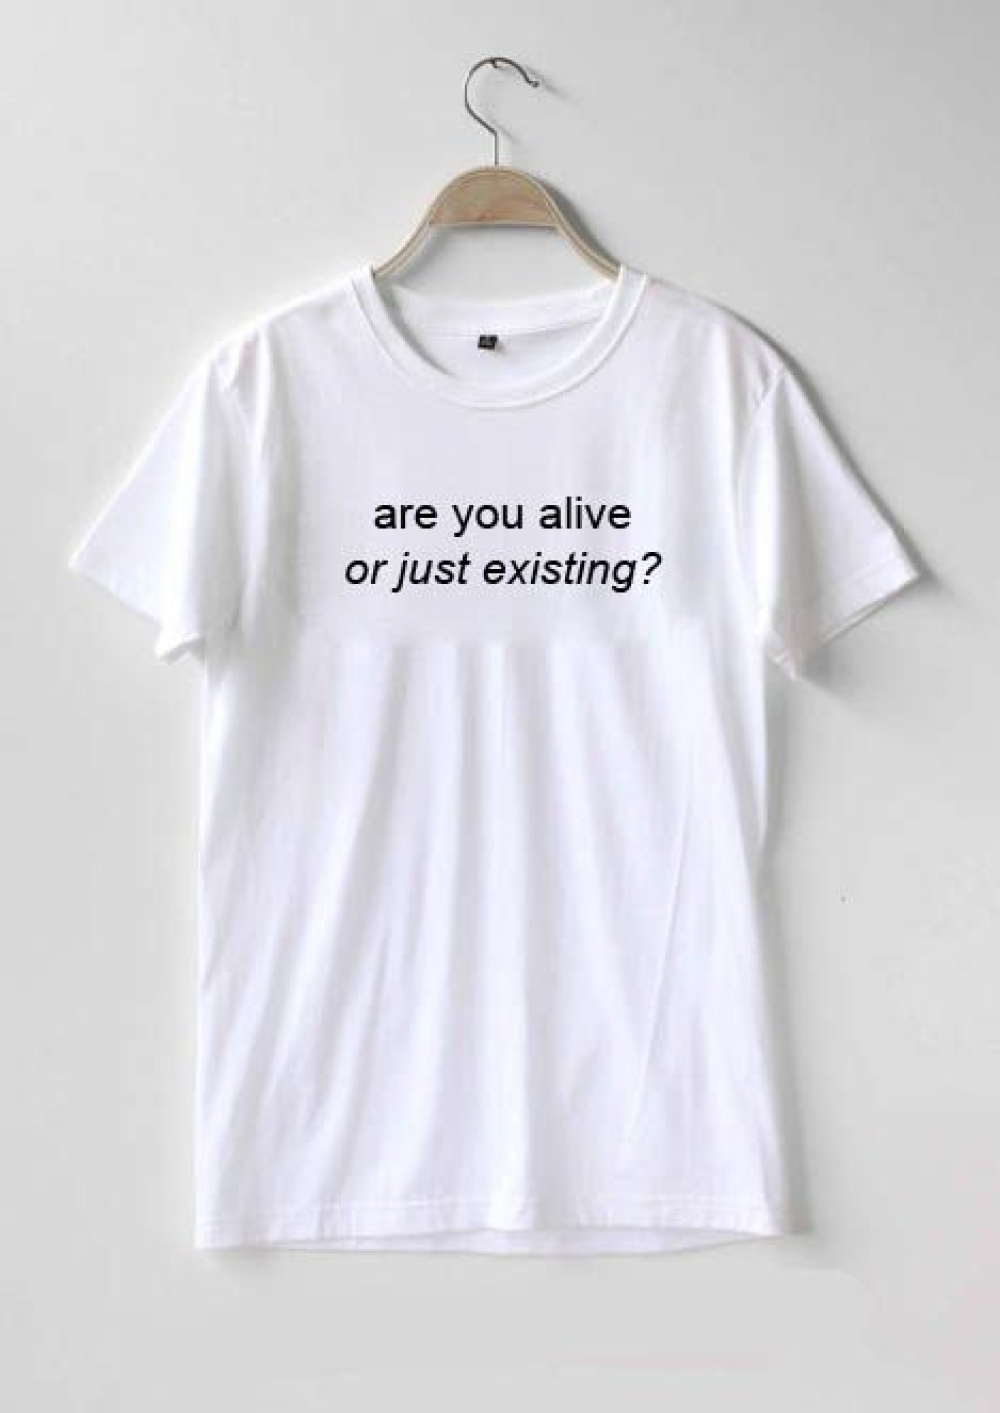 are you alive or just existing T-shirt Adult Unisex For men and women